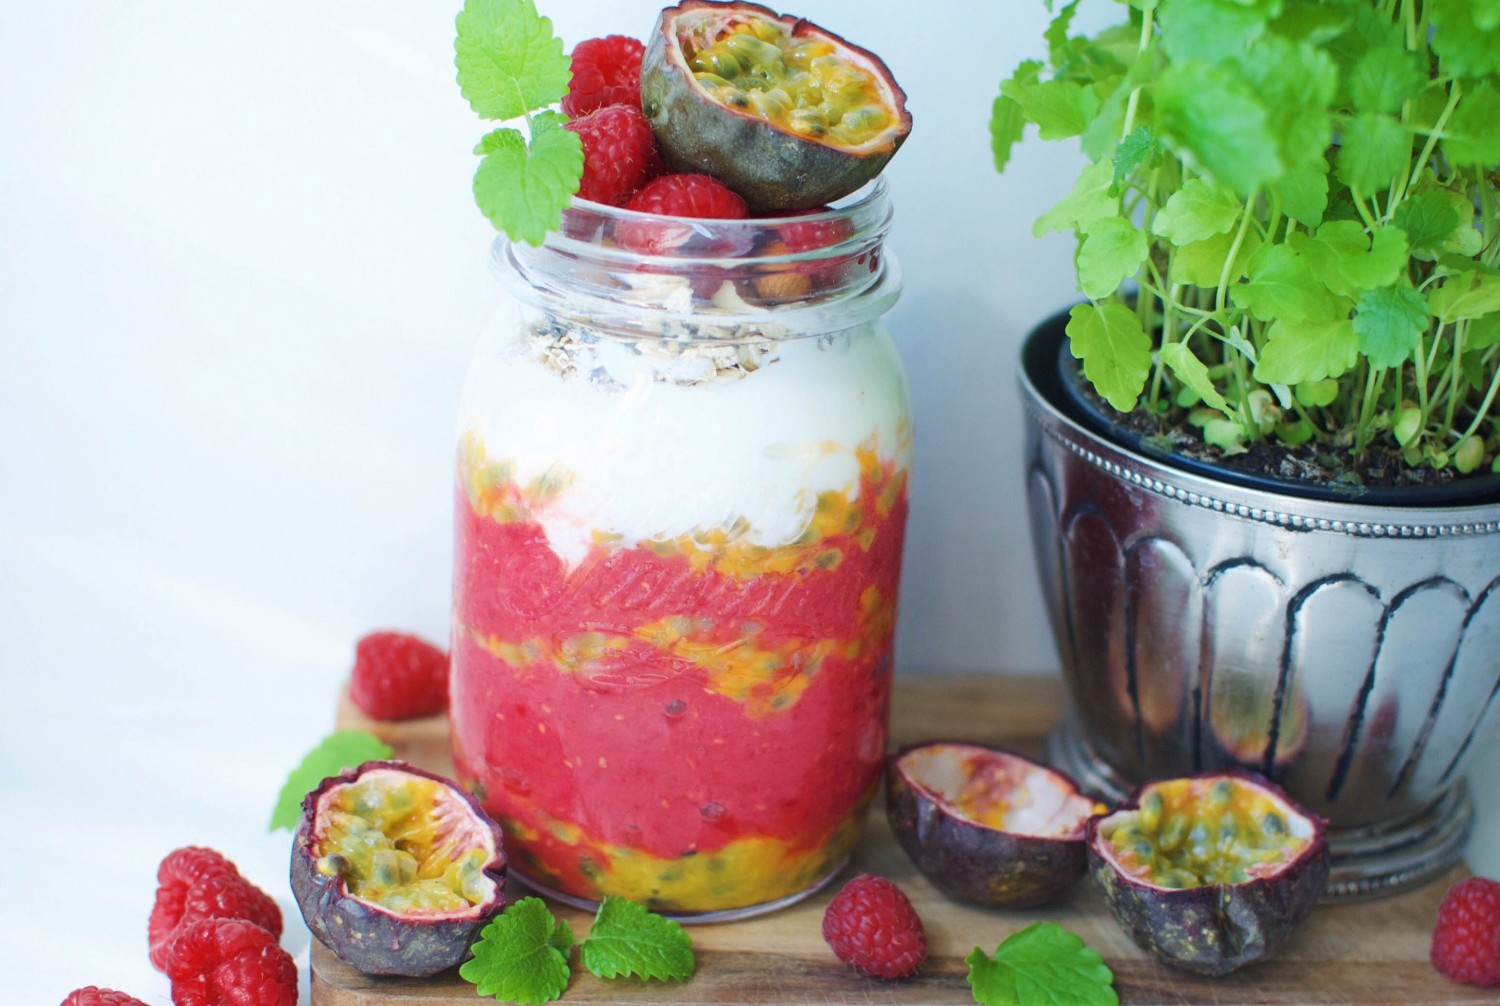 Breakfast parfait with raspberry and passion fruit